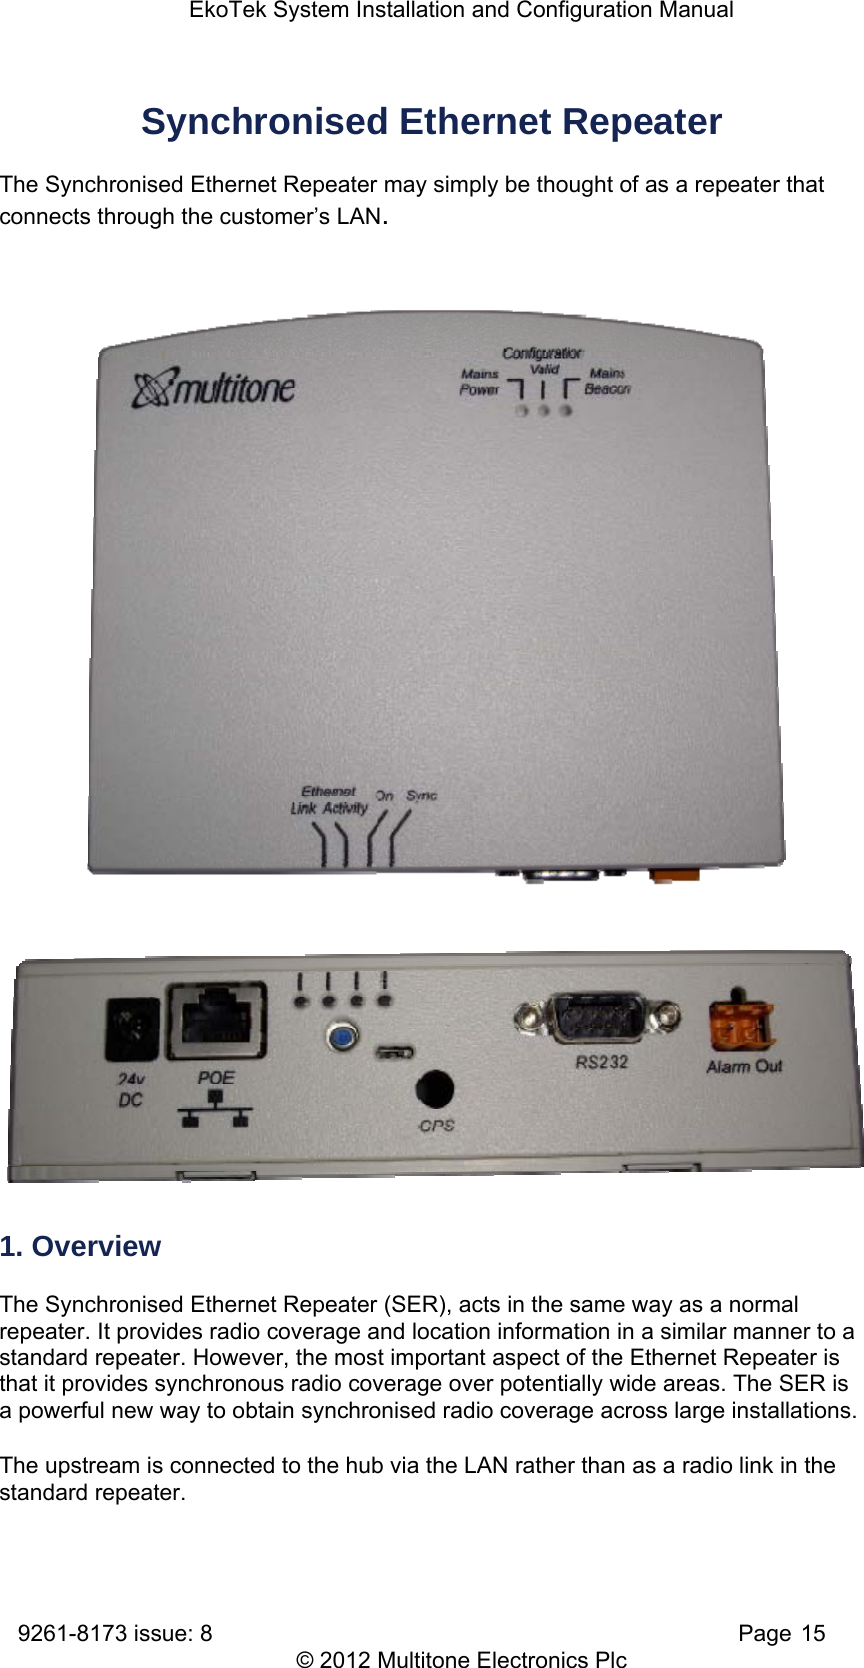 EkoTek System Installation and Configuration Manual 9261-8173 issue: 8   Page 15 © 2012 Multitone Electronics Plc Synchronised Ethernet Repeater   The Synchronised Ethernet Repeater may simply be thought of as a repeater that connects through the customer’s LAN.      1. Overview The Synchronised Ethernet Repeater (SER), acts in the same way as a normal repeater. It provides radio coverage and location information in a similar manner to a standard repeater. However, the most important aspect of the Ethernet Repeater is that it provides synchronous radio coverage over potentially wide areas. The SER is a powerful new way to obtain synchronised radio coverage across large installations.  The upstream is connected to the hub via the LAN rather than as a radio link in the standard repeater. 